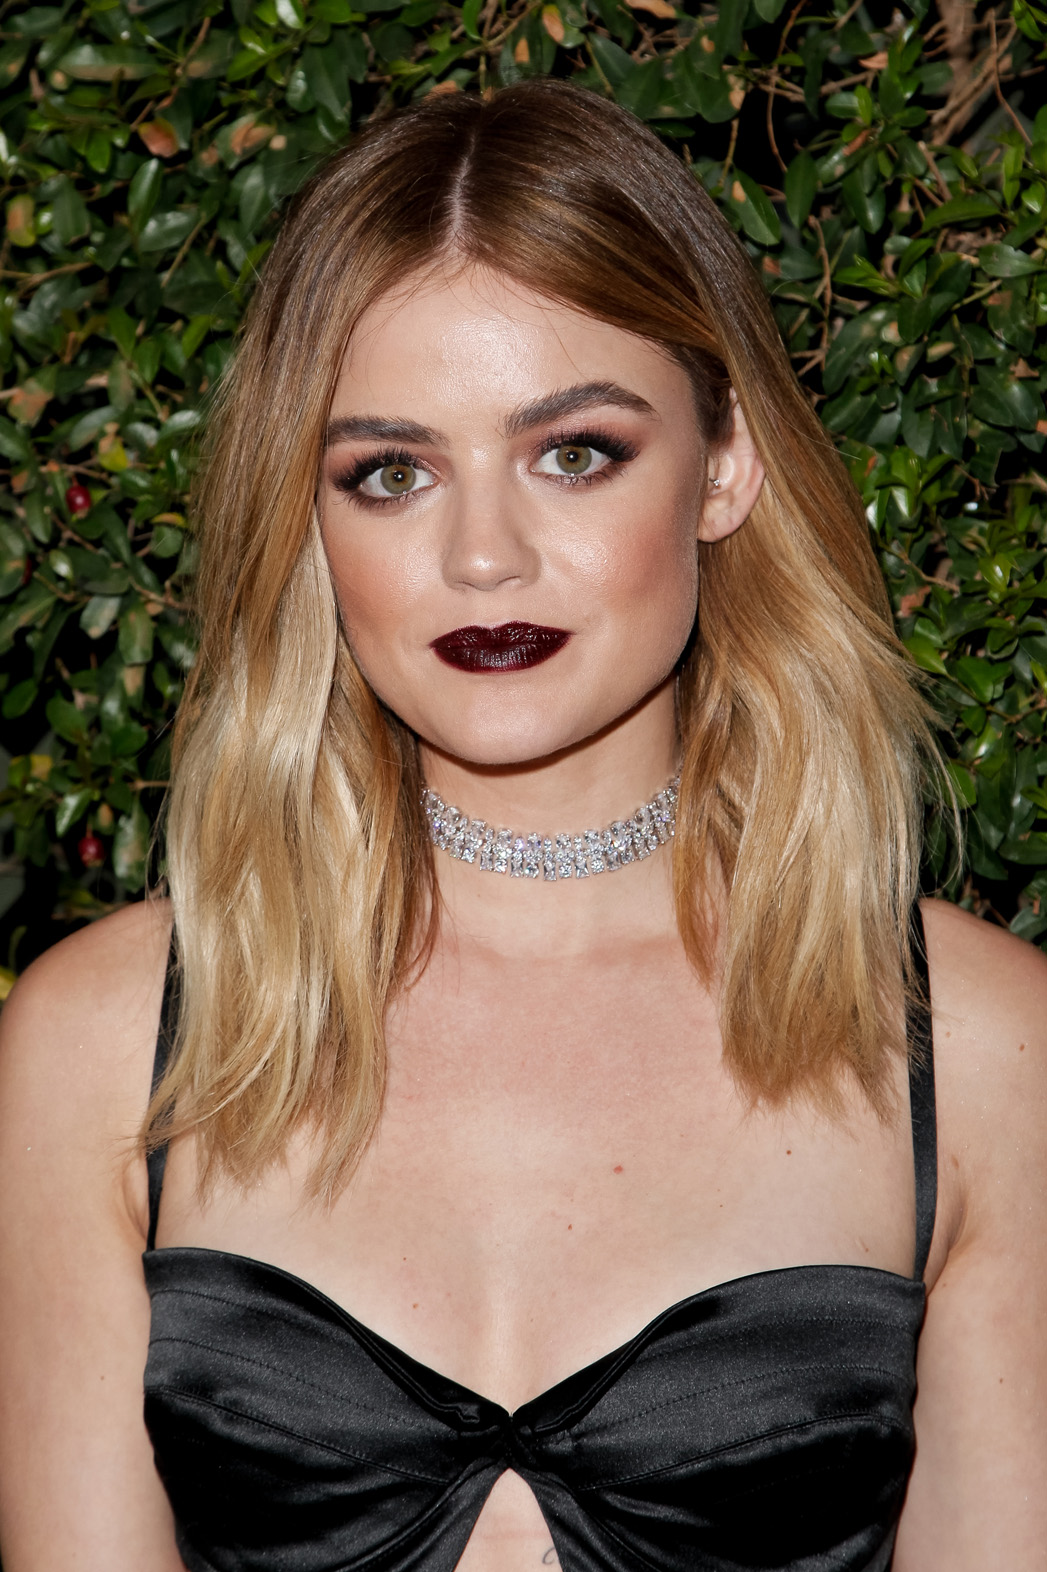 connor sears add lucy hale leaked topless pictures photo